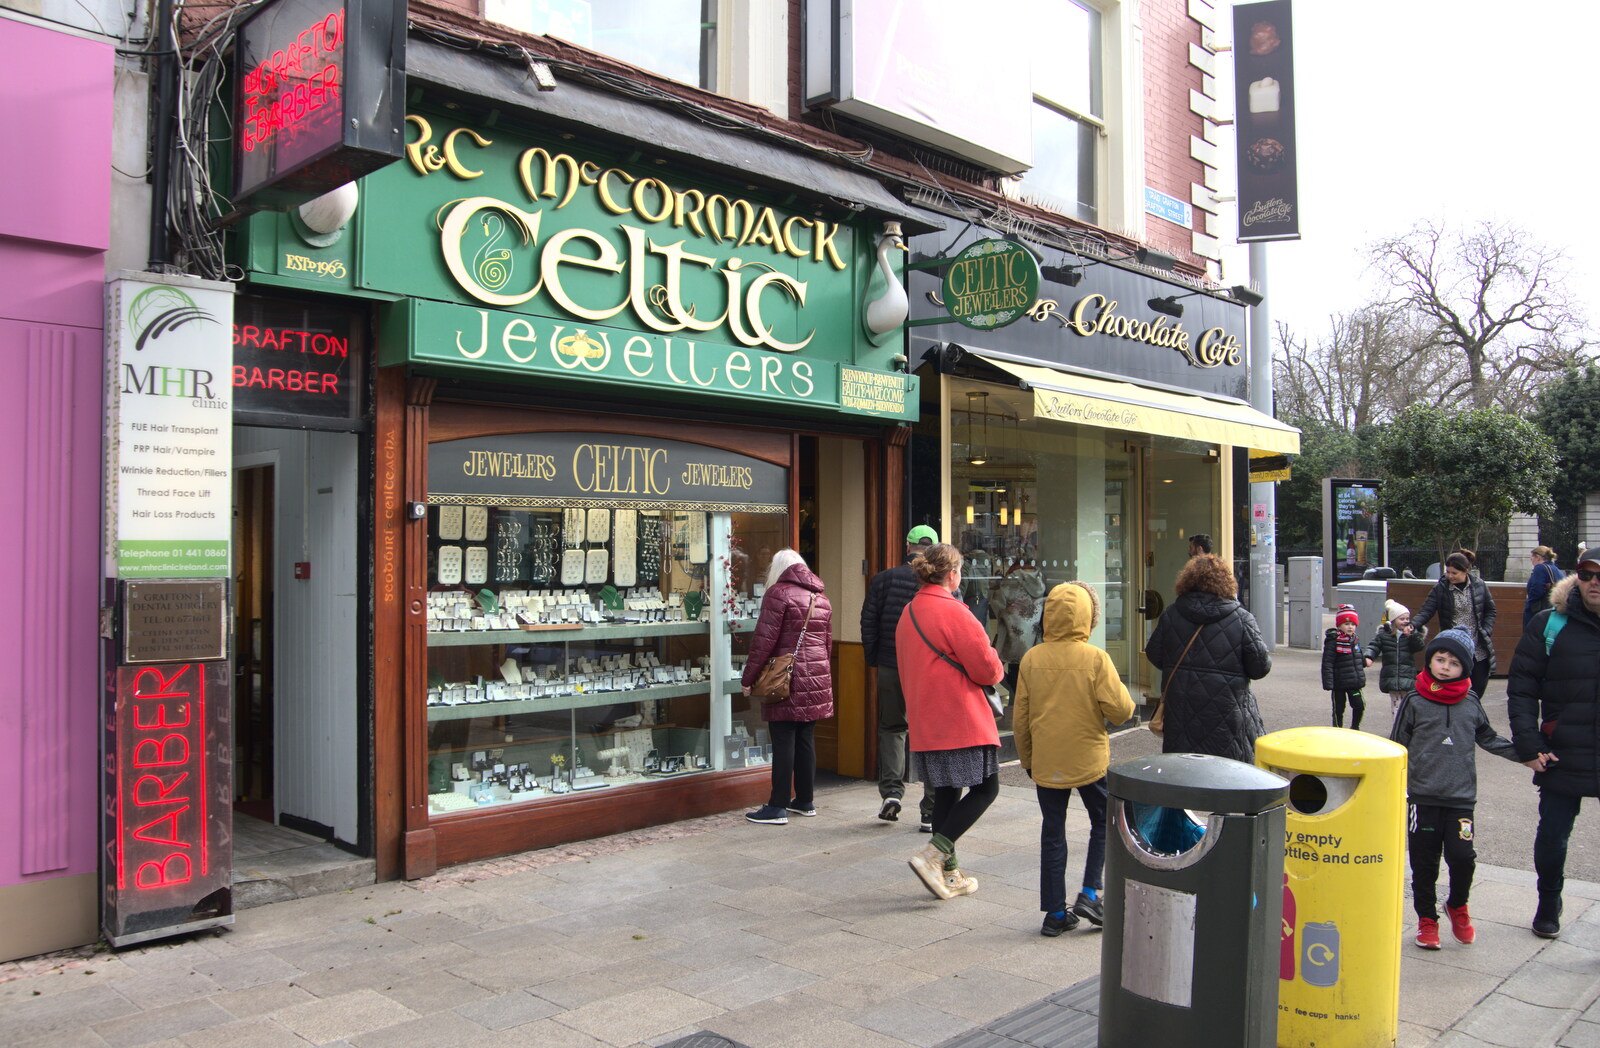 The Celtic Jewellers on Grafton Street from The Dead Zoo, Dublin, Ireland - 17th February 2023